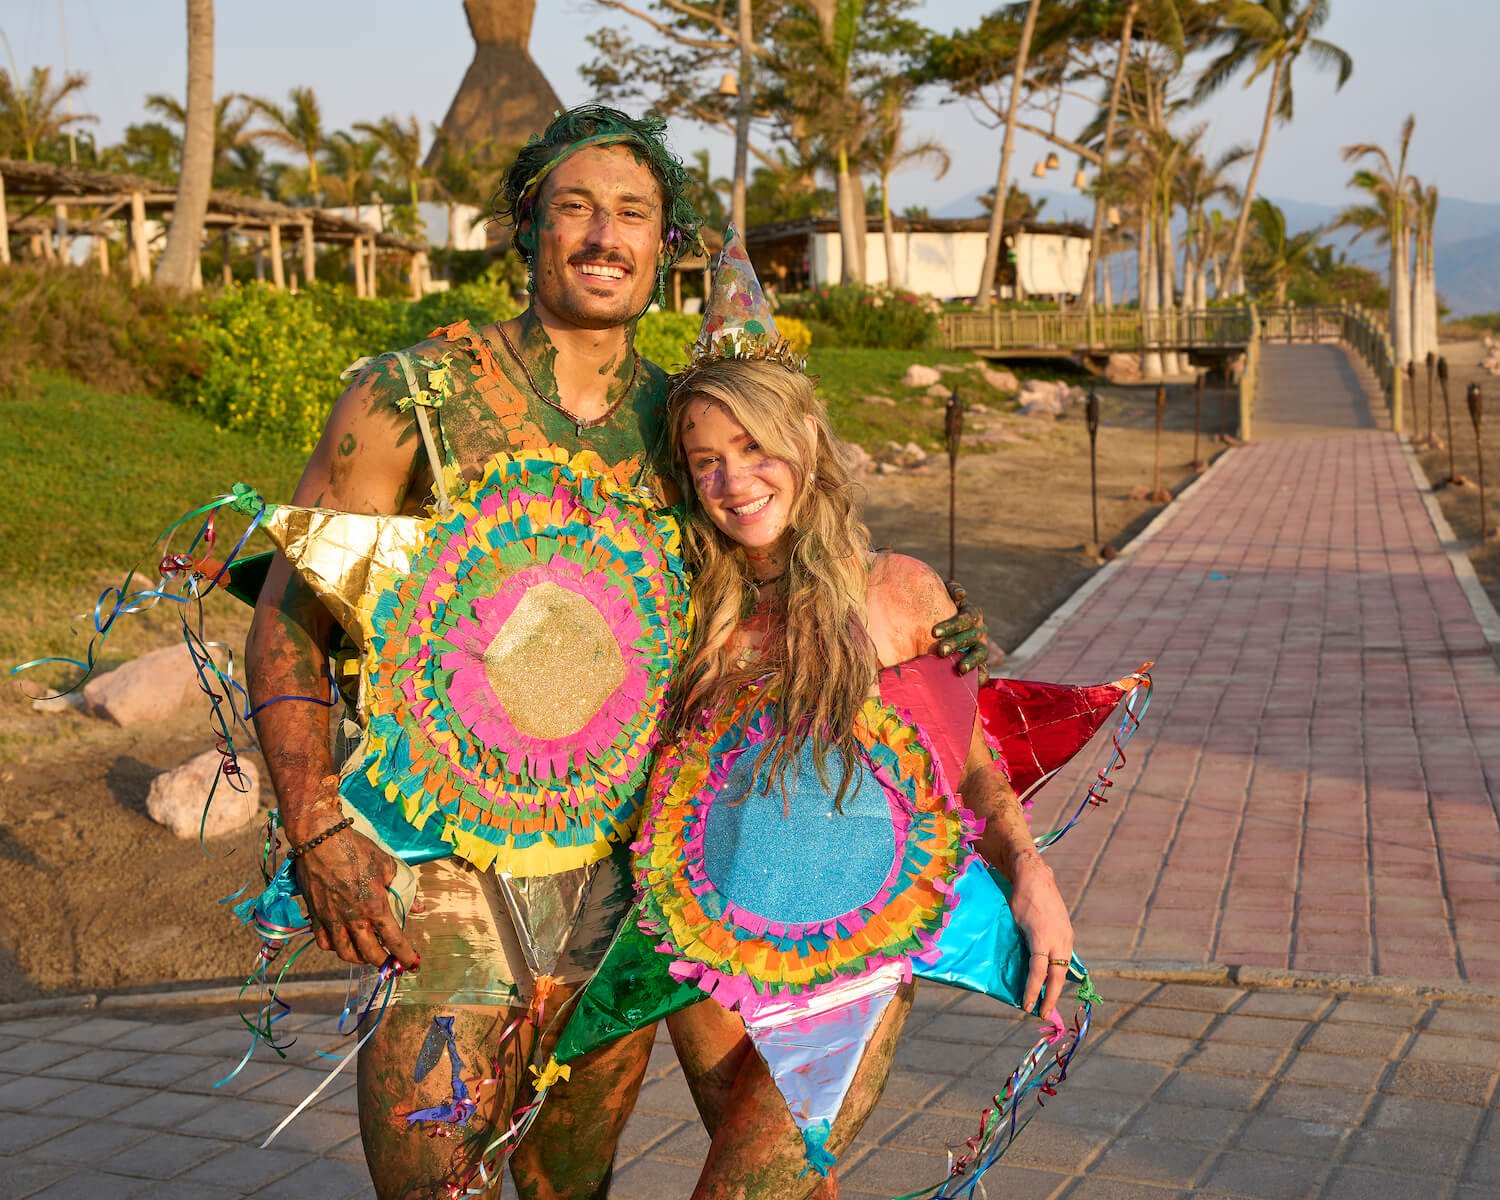 Brayden Bowers and Rachel Recchia covered in paint after their date in 'Bachelor in Paradise' Season 9